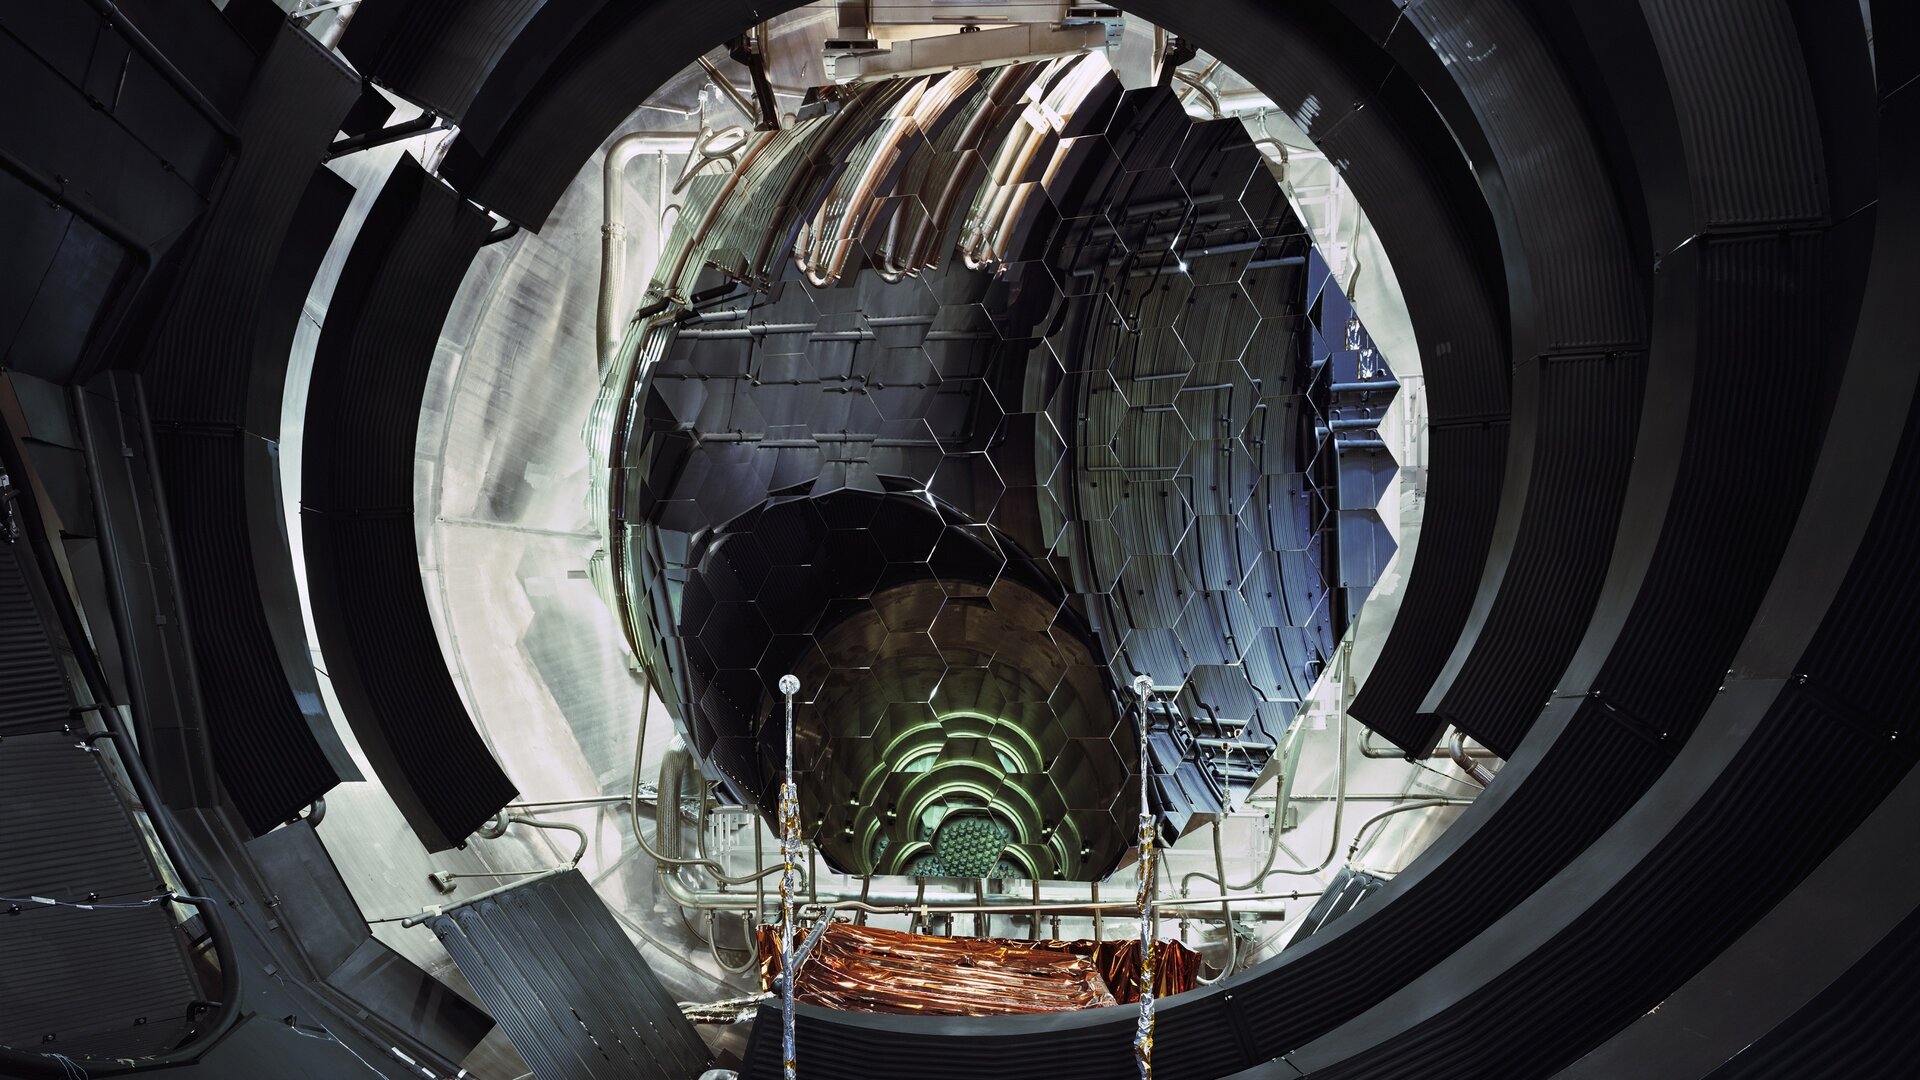 Interior of the Large Space Simulator (LSS) Vaccum Chamber